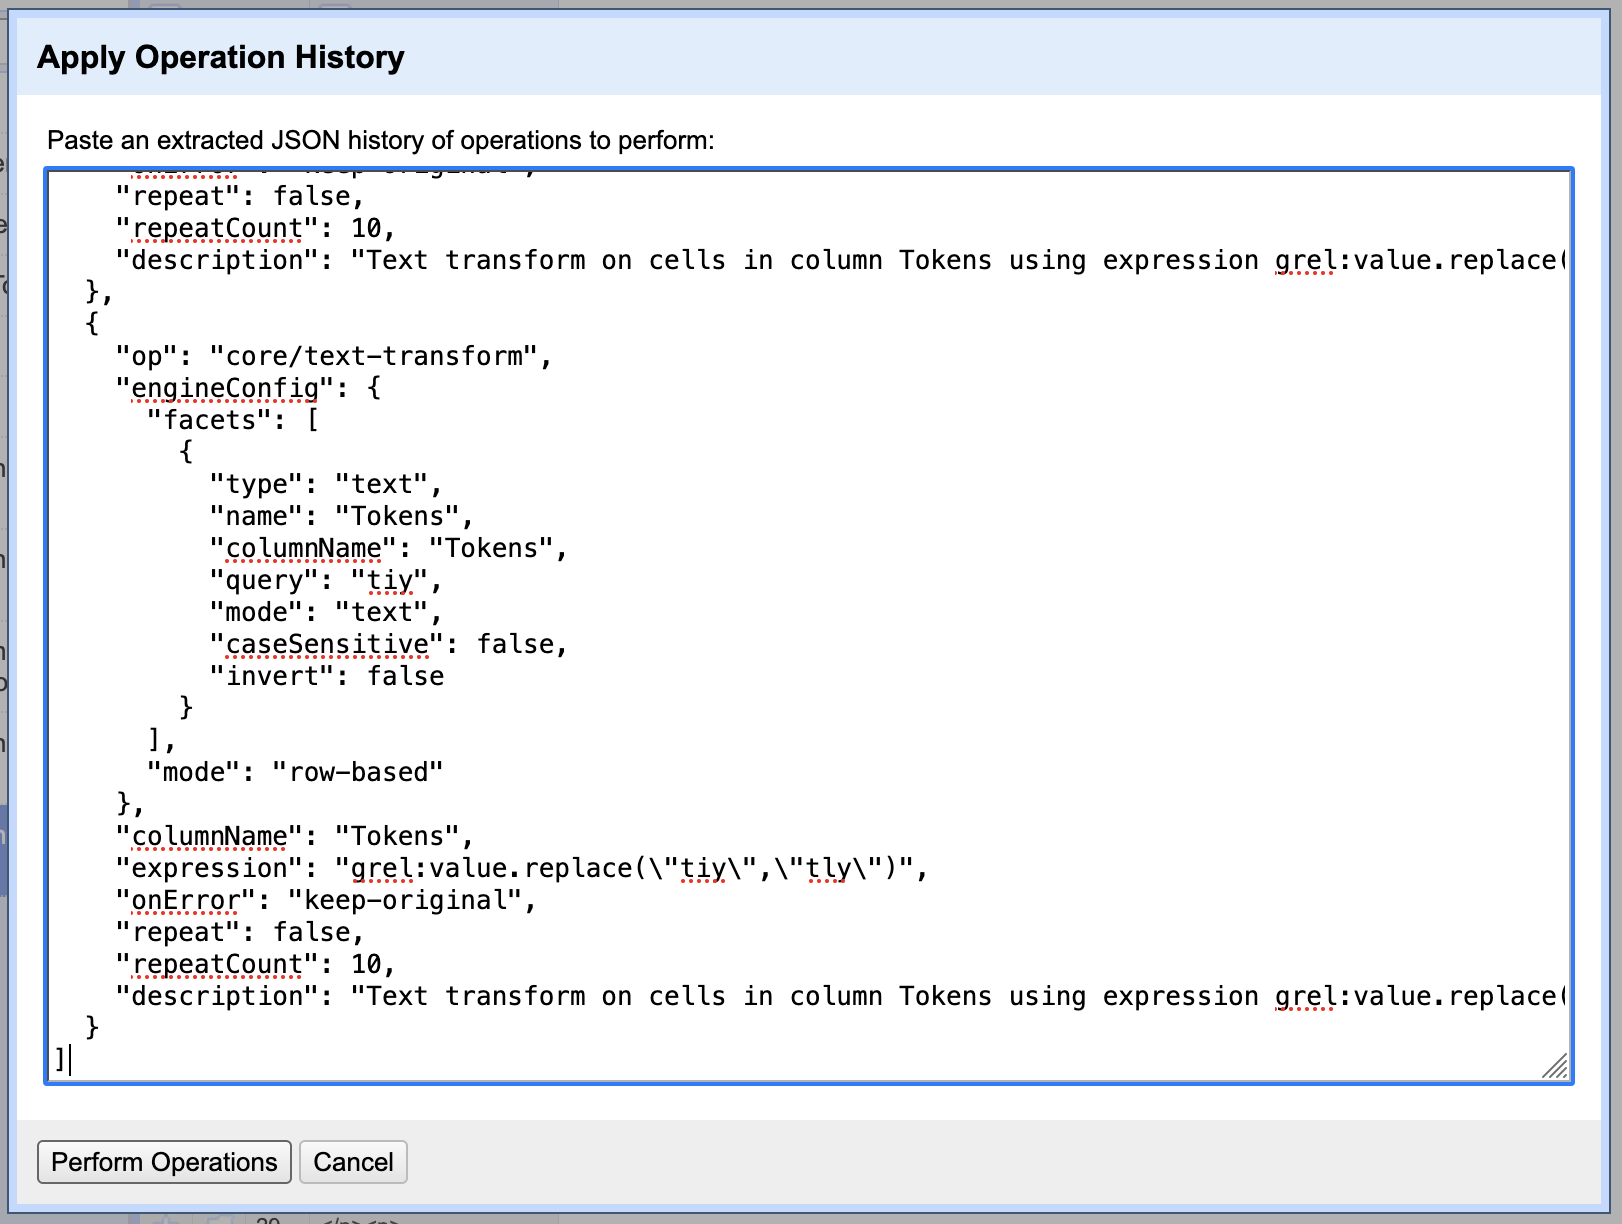 apply operation history window, allowing you to repeat operations from a JSON file